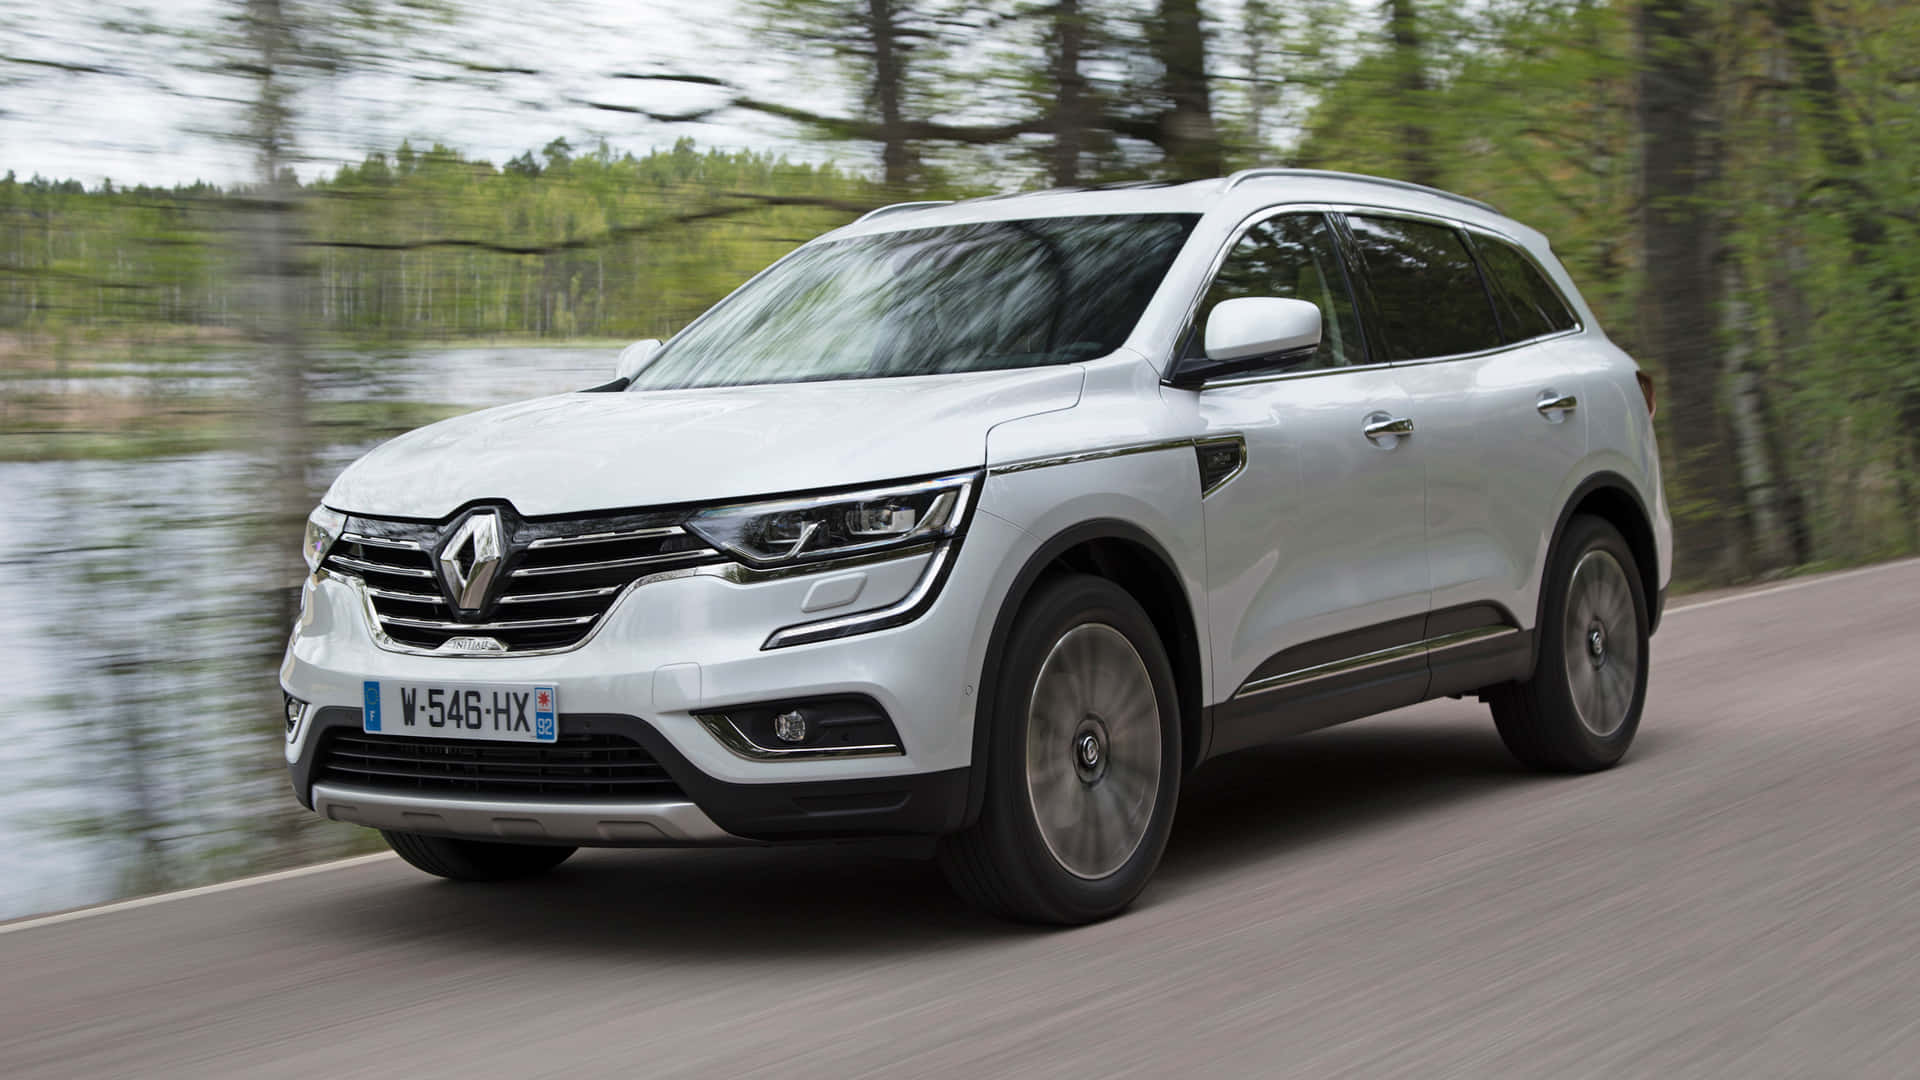 The Incredibly Stunning Renault Koleos In Motion Wallpaper